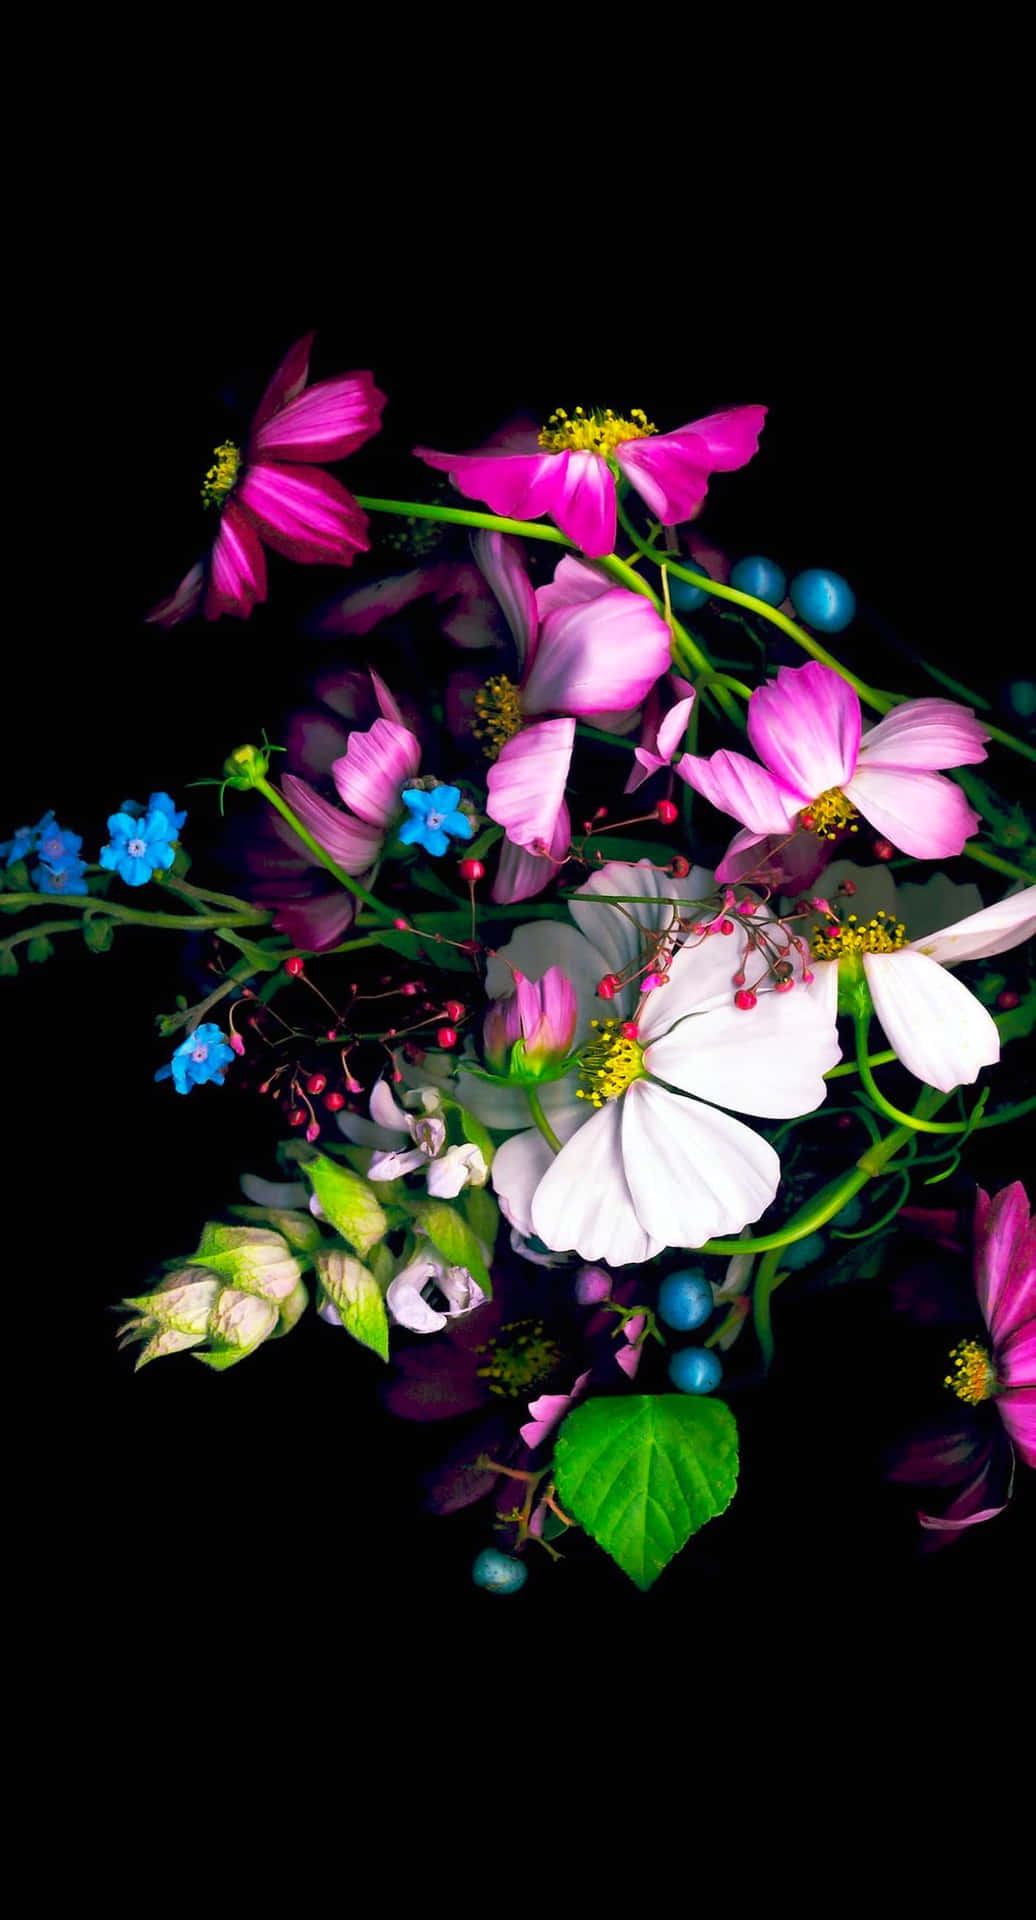 Enjoy the enchaning beauty of these colorful flowers Wallpaper